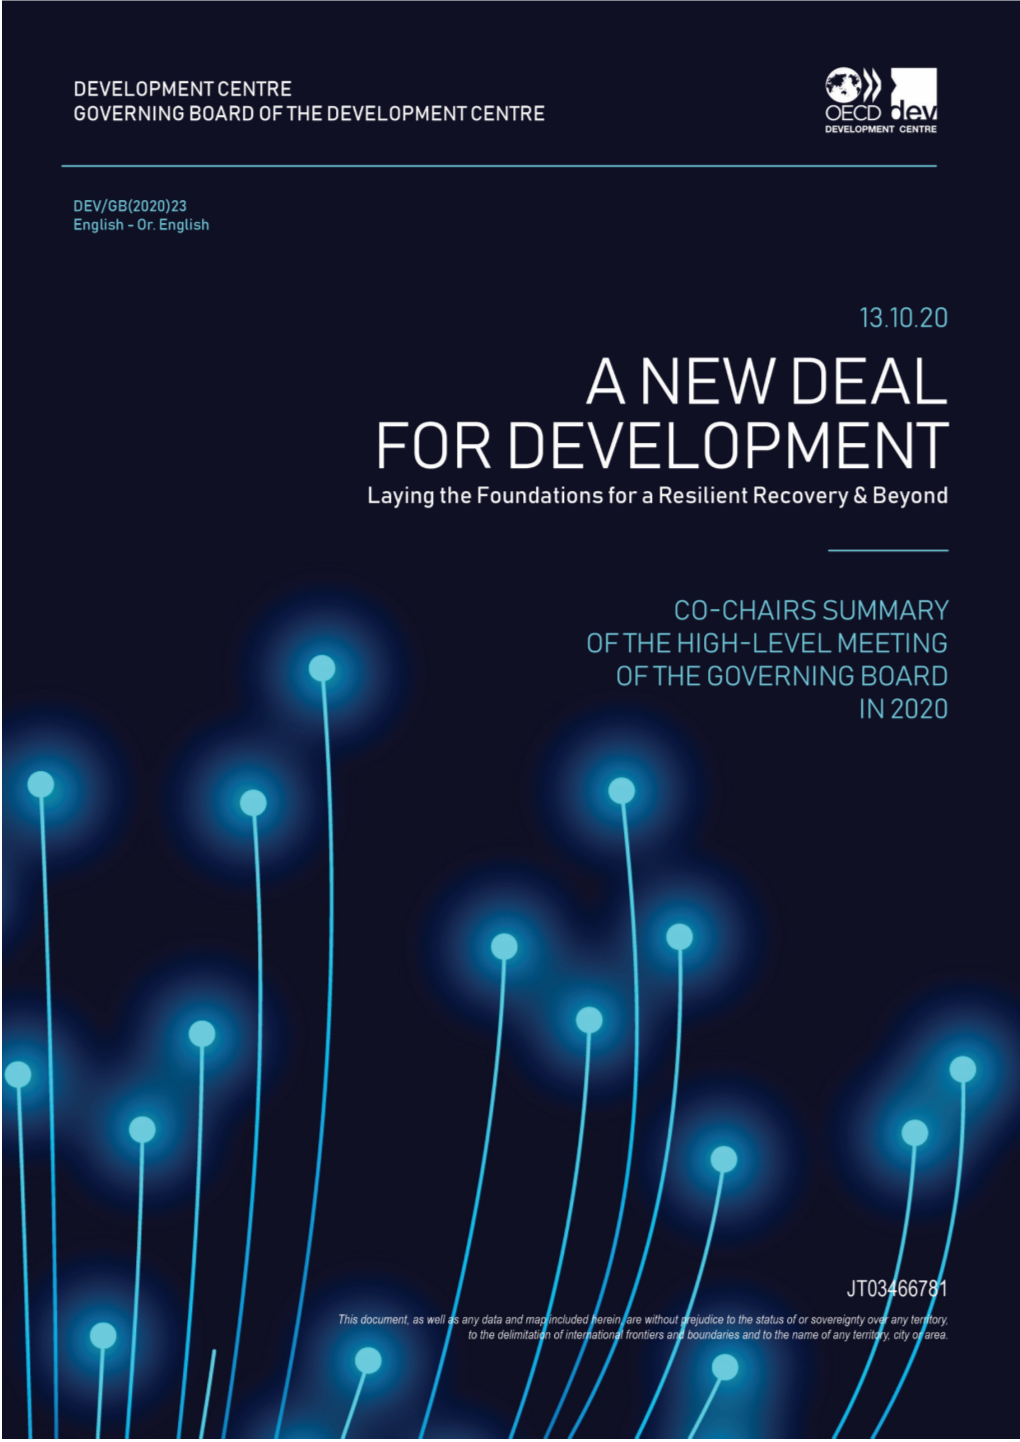 A New Deal for Development: Laying the Foundations for a Resilient Recovery and Beyond”